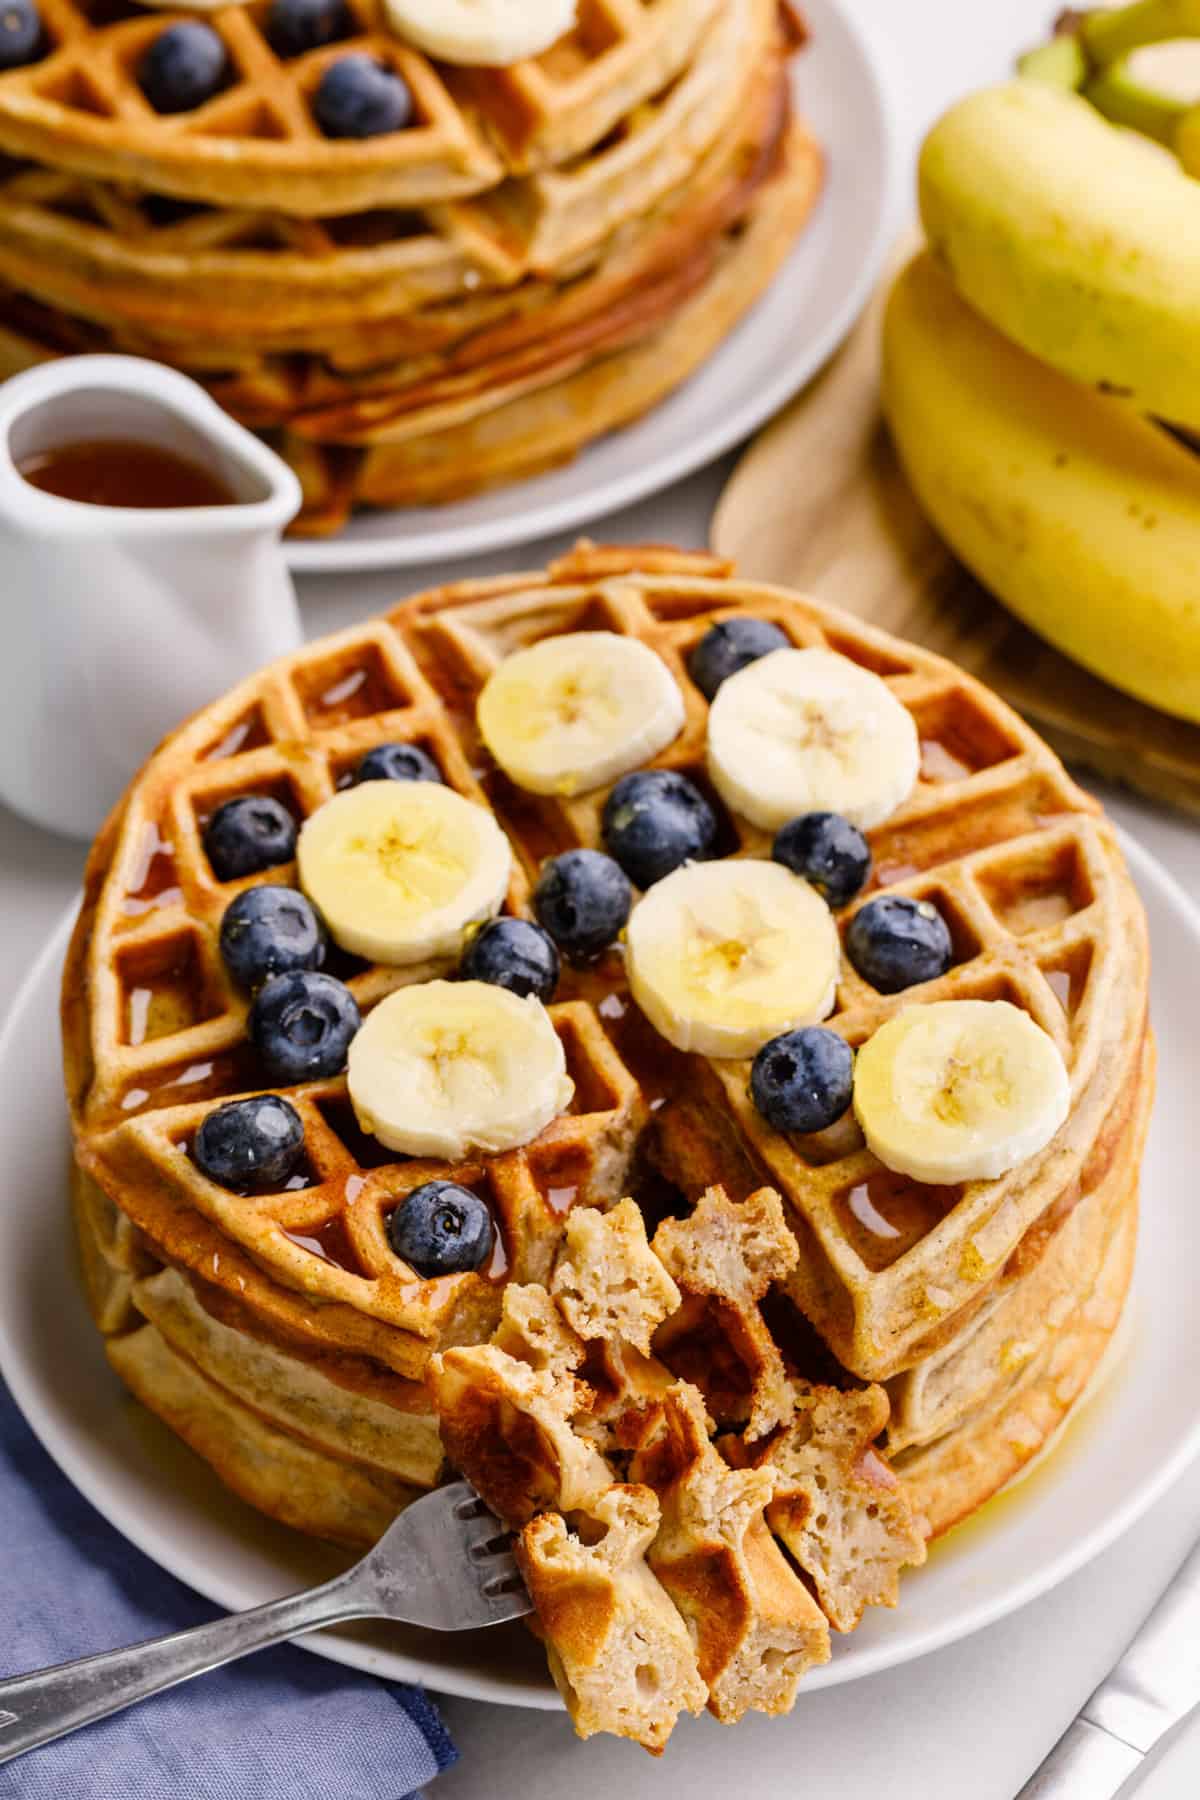 cross section shown of a stack of banana pancakes topped with sliced fresh bananas, blueberries and syrup.